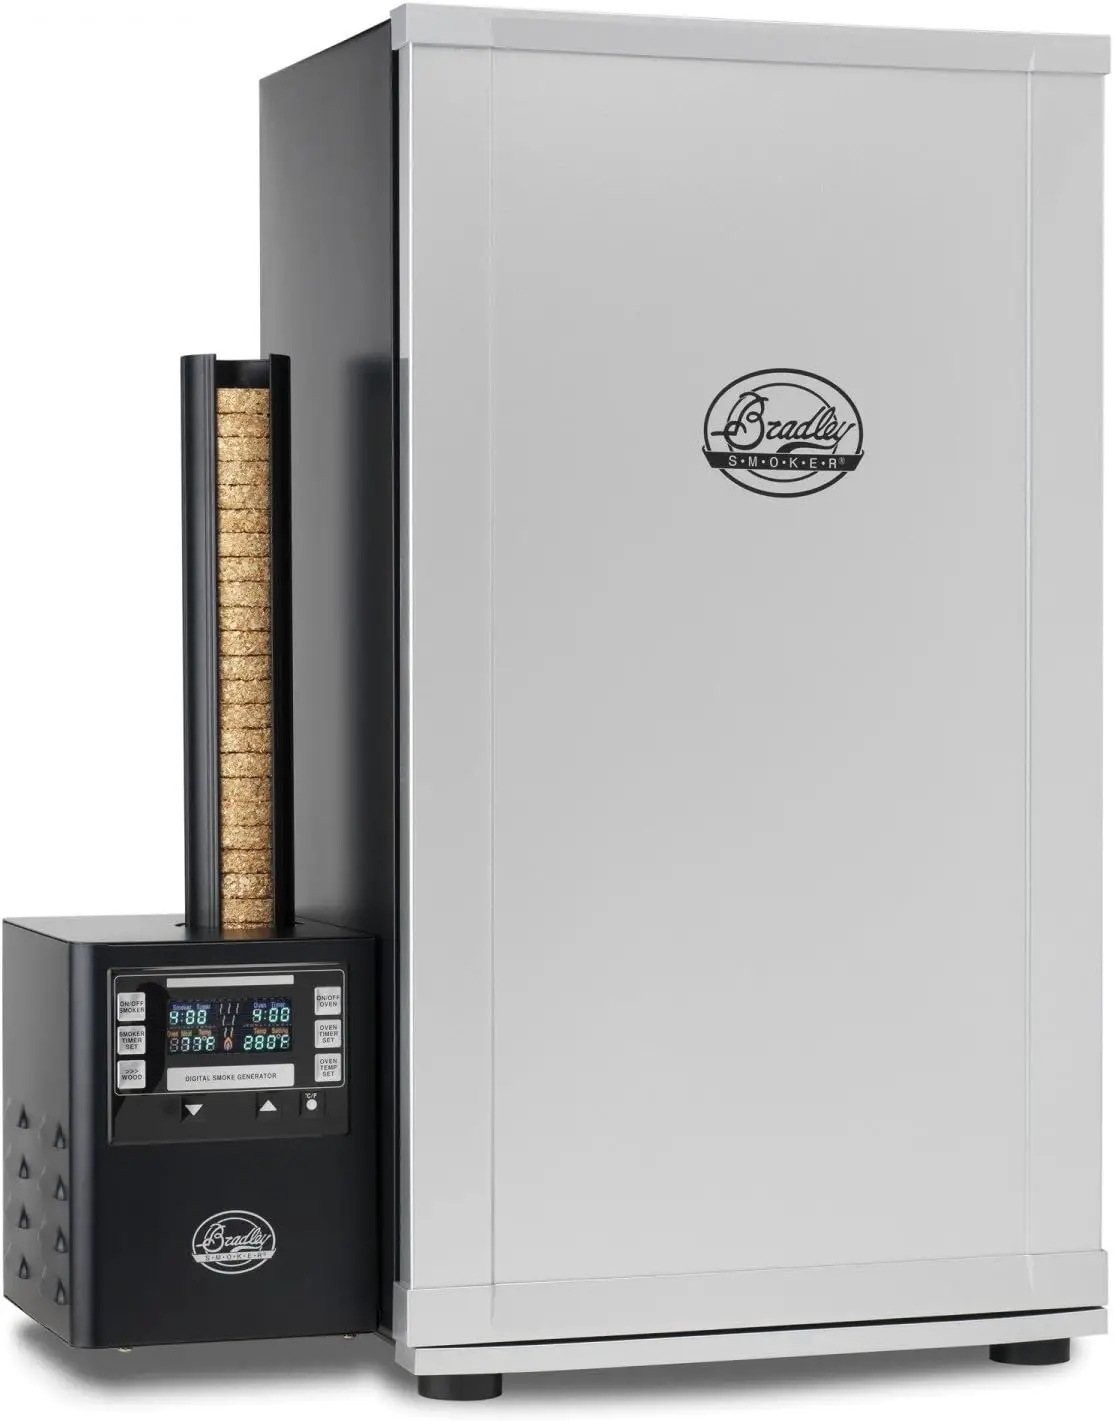 You are currently viewing Bradley Smoker BTDS76P 4-Rack Outdoor Natural Draft Digital Vertical Smoker Review